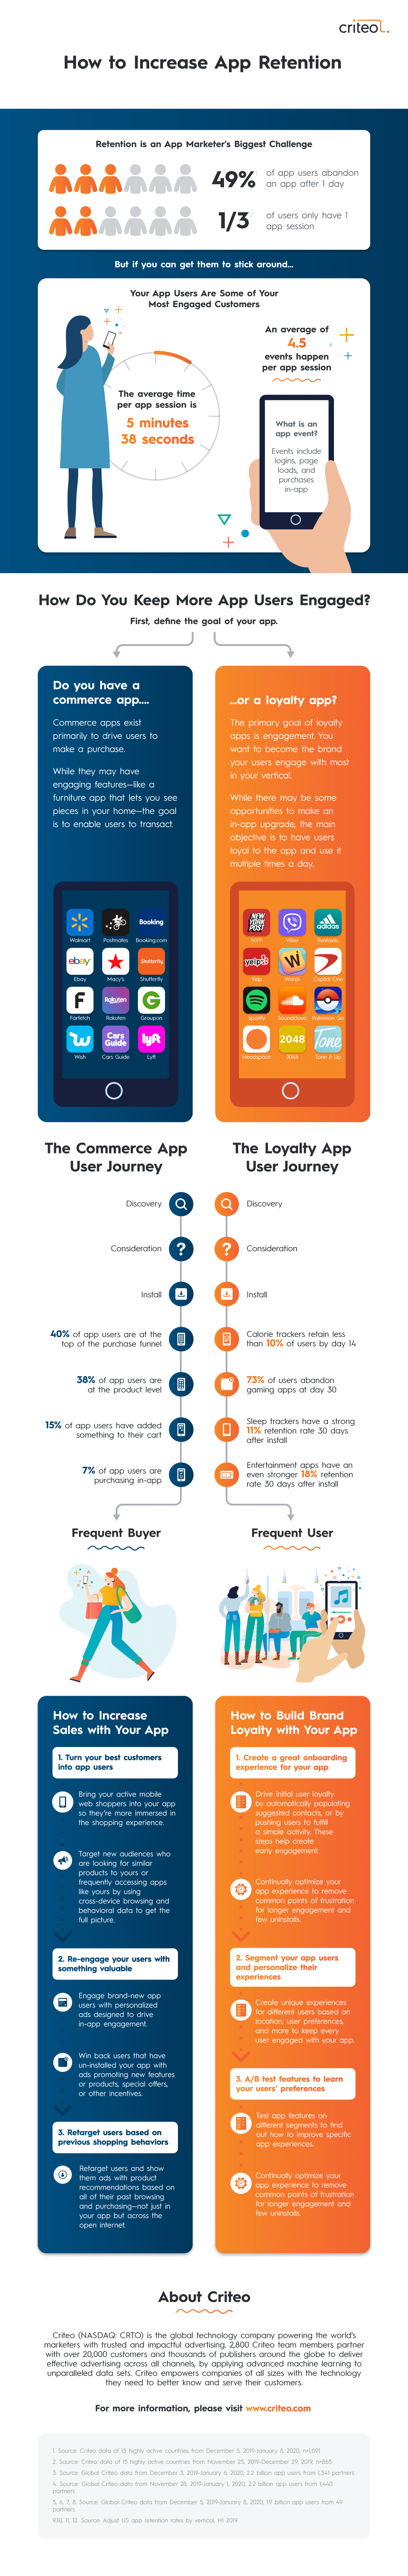 How to Increase App Retention Infographic